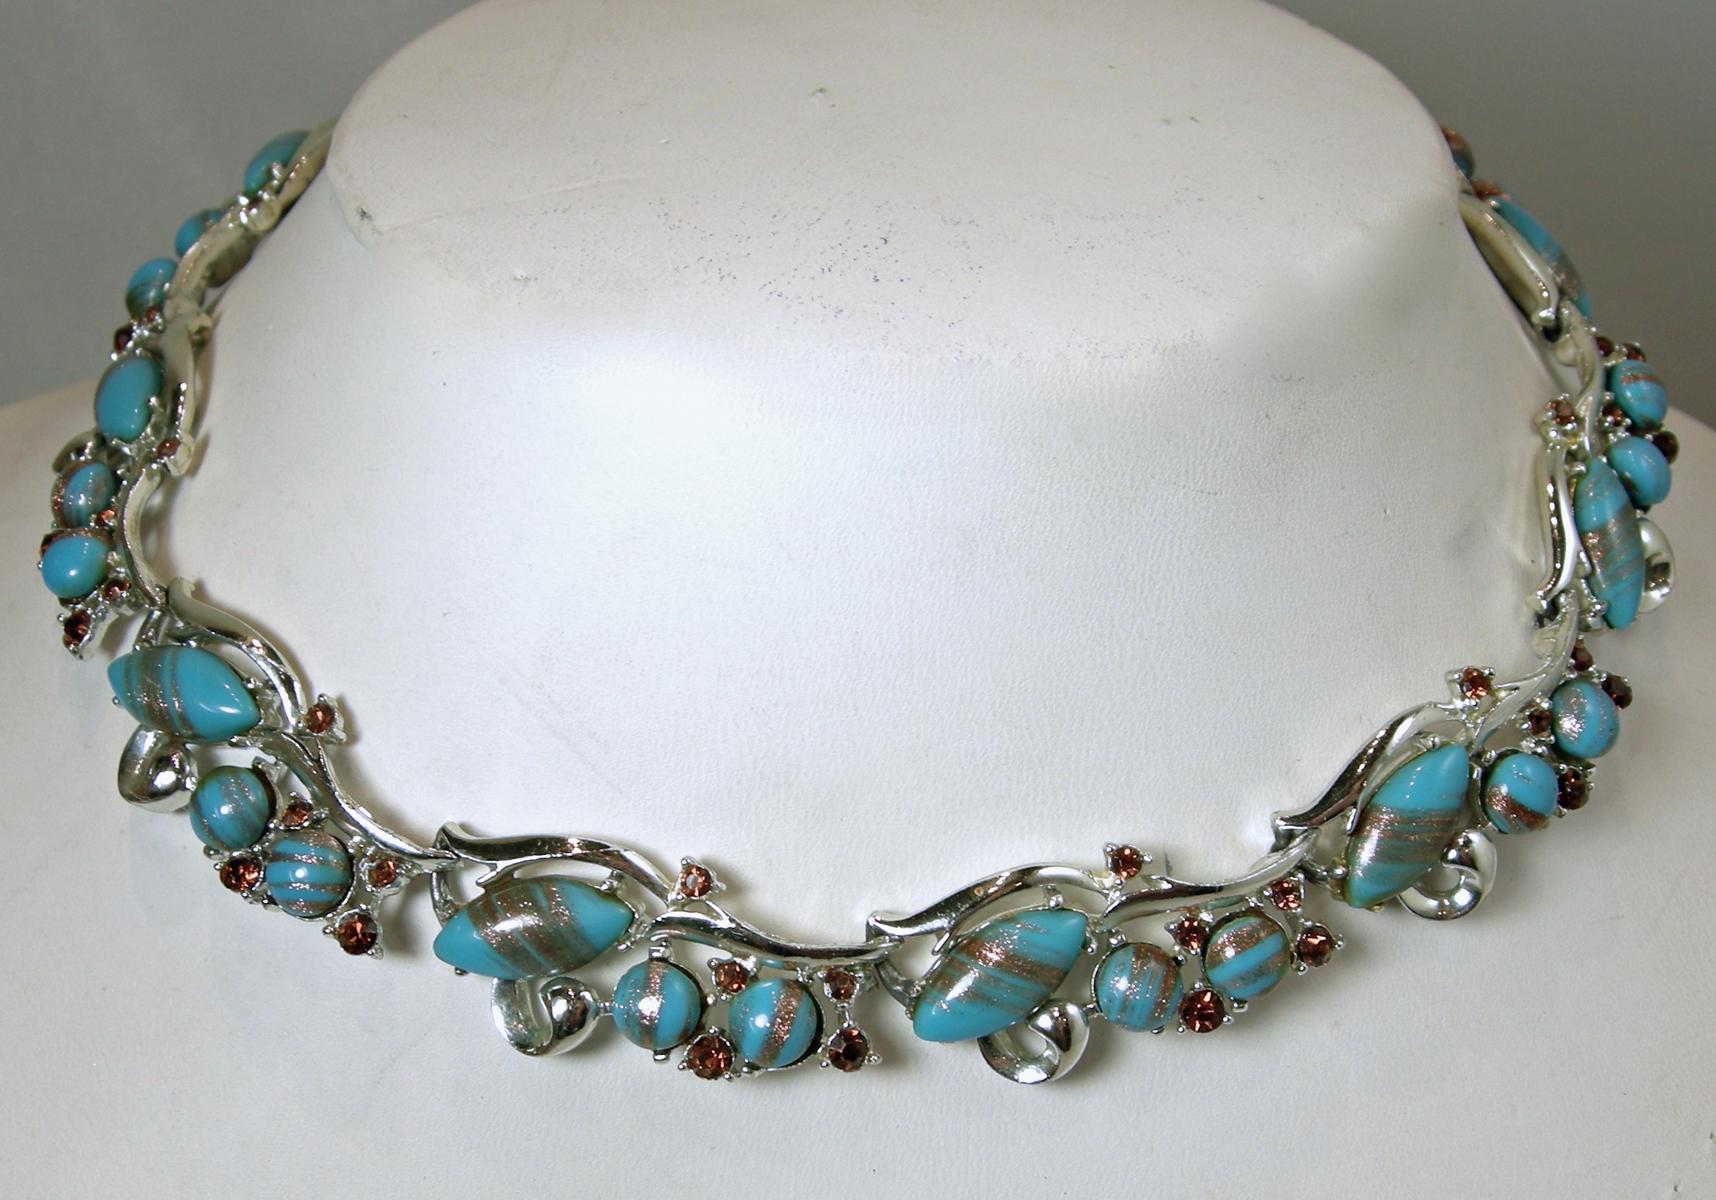 This vintage Murano glass necklace & earrings set integrates the color turquoise with topaz crystal accents in a silver tone setting.  The necklace measures 16” x 5/8” with a hook clasp. The matching clip earrings are 1-1/8” x 1”.